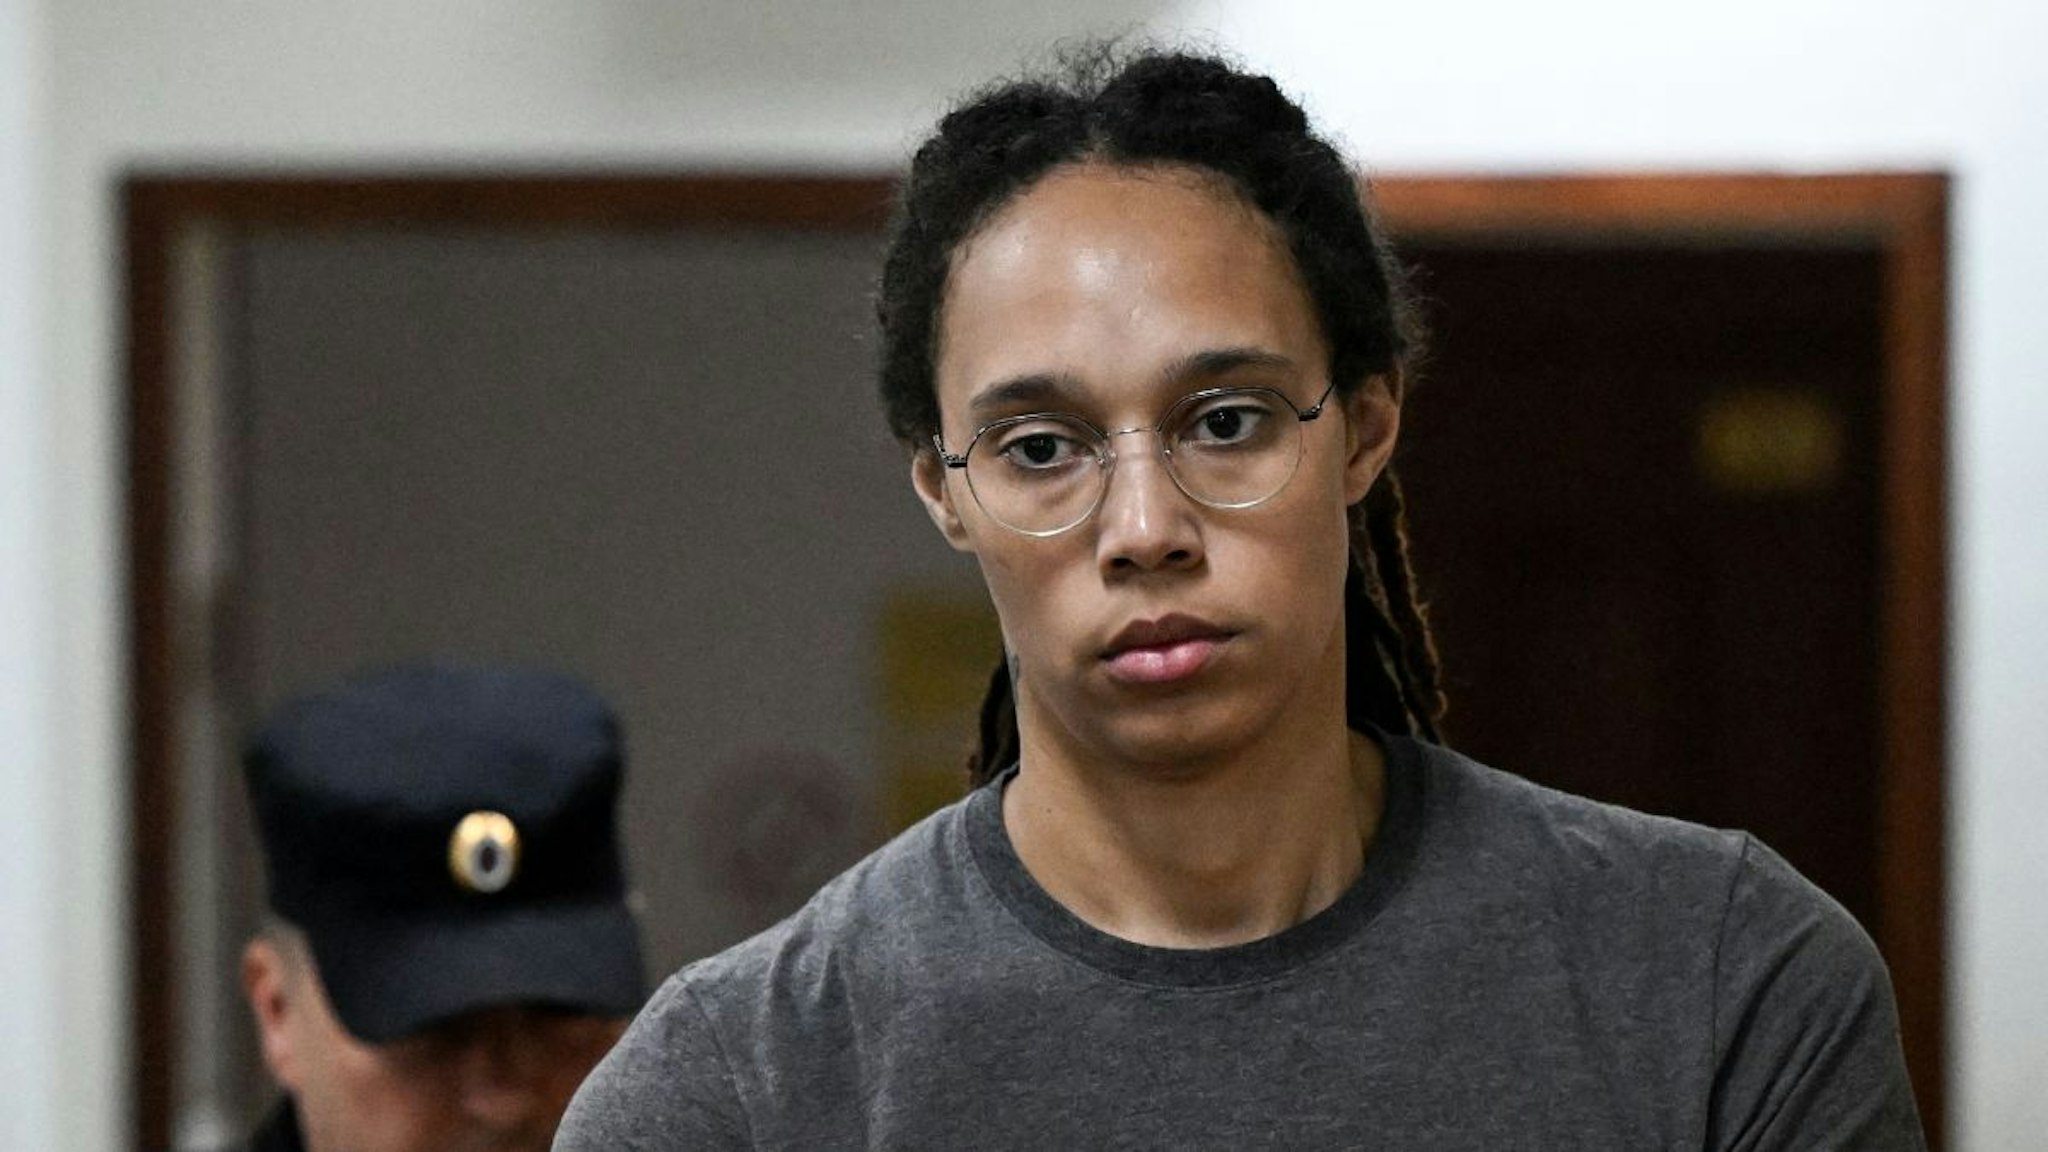 US' Women's National Basketball Association (WNBA) basketball player Brittney Griner, who was detained at Moscow's Sheremetyevo airport and later charged with illegal possession of cannabis, arrives to a hearing at the Khimki Court, outside Moscow on August 4, 2022.